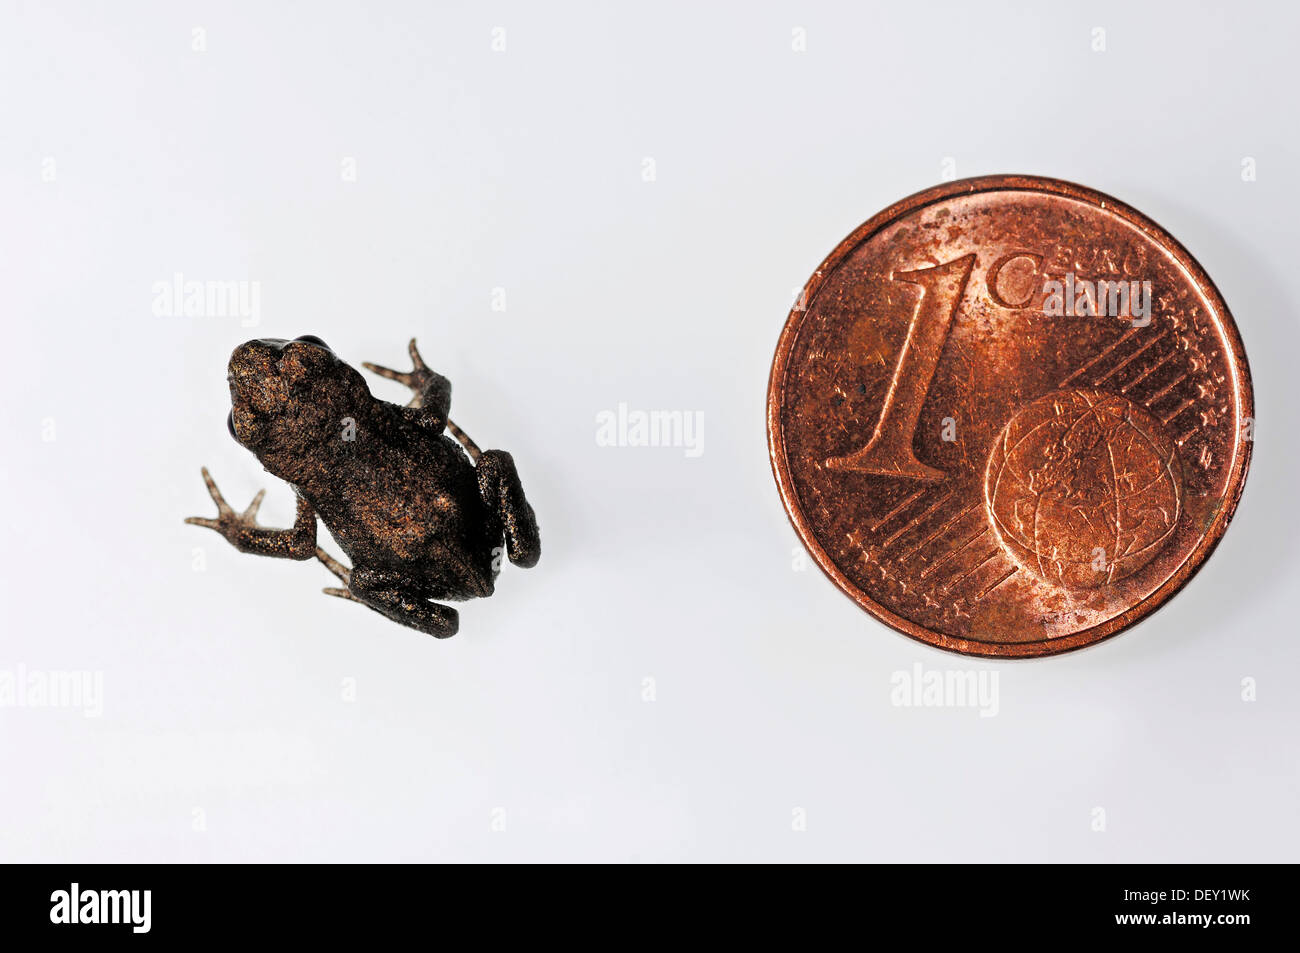 Common Toad or European Toad (Bufo bufo), juvenile beside a 1-cent coin for size comparison, North Rhine-Westphalia Stock Photo